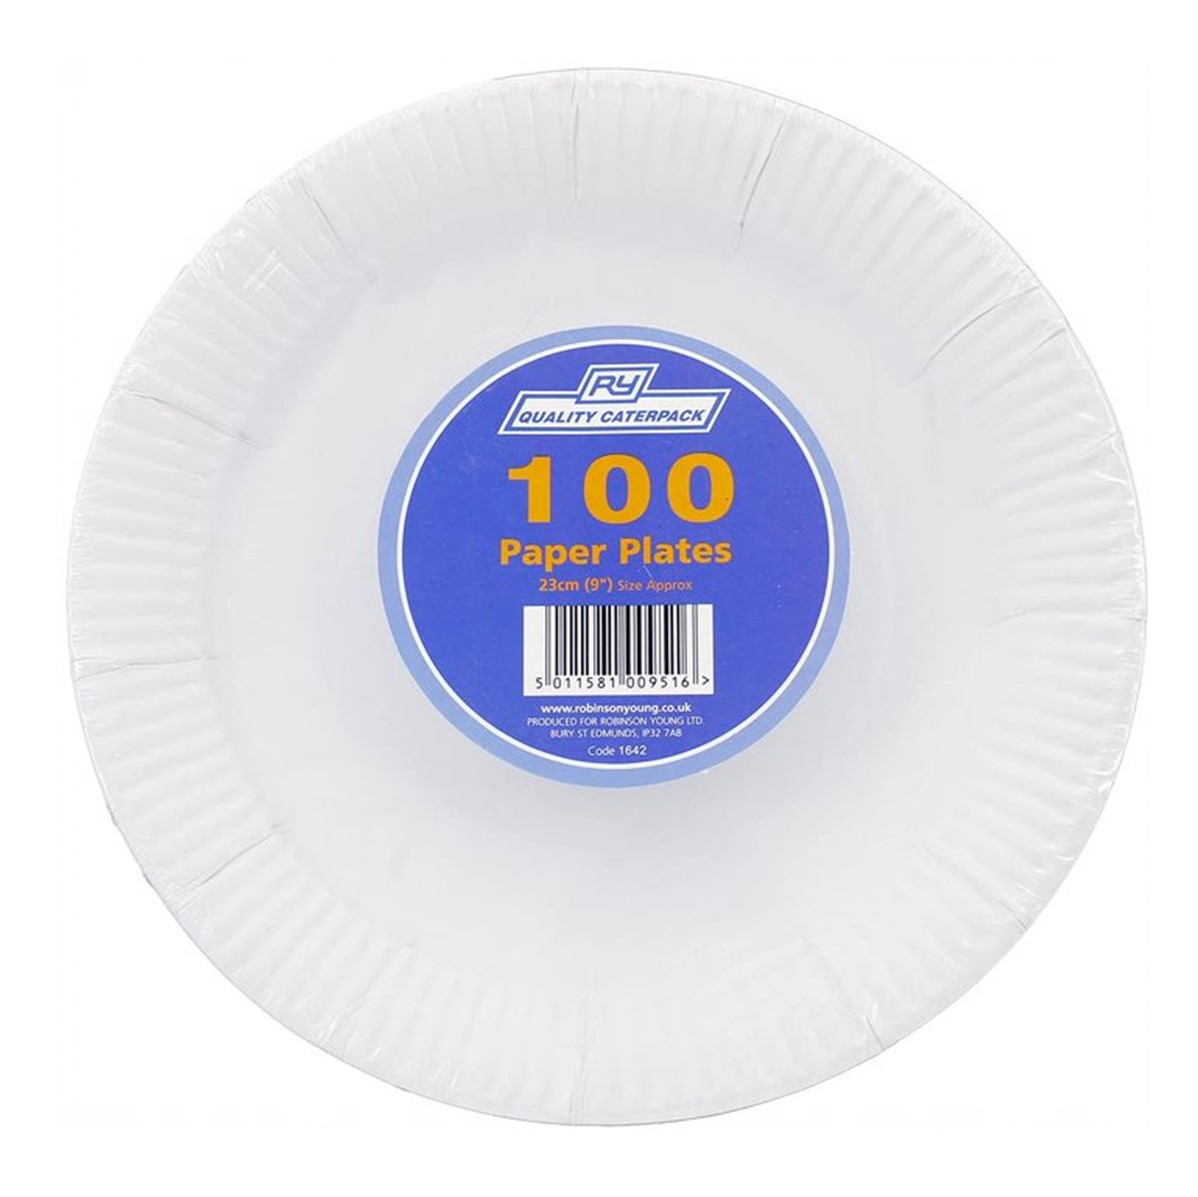 RY Caterpack Paper Plates - 100x23cm [9''] plates